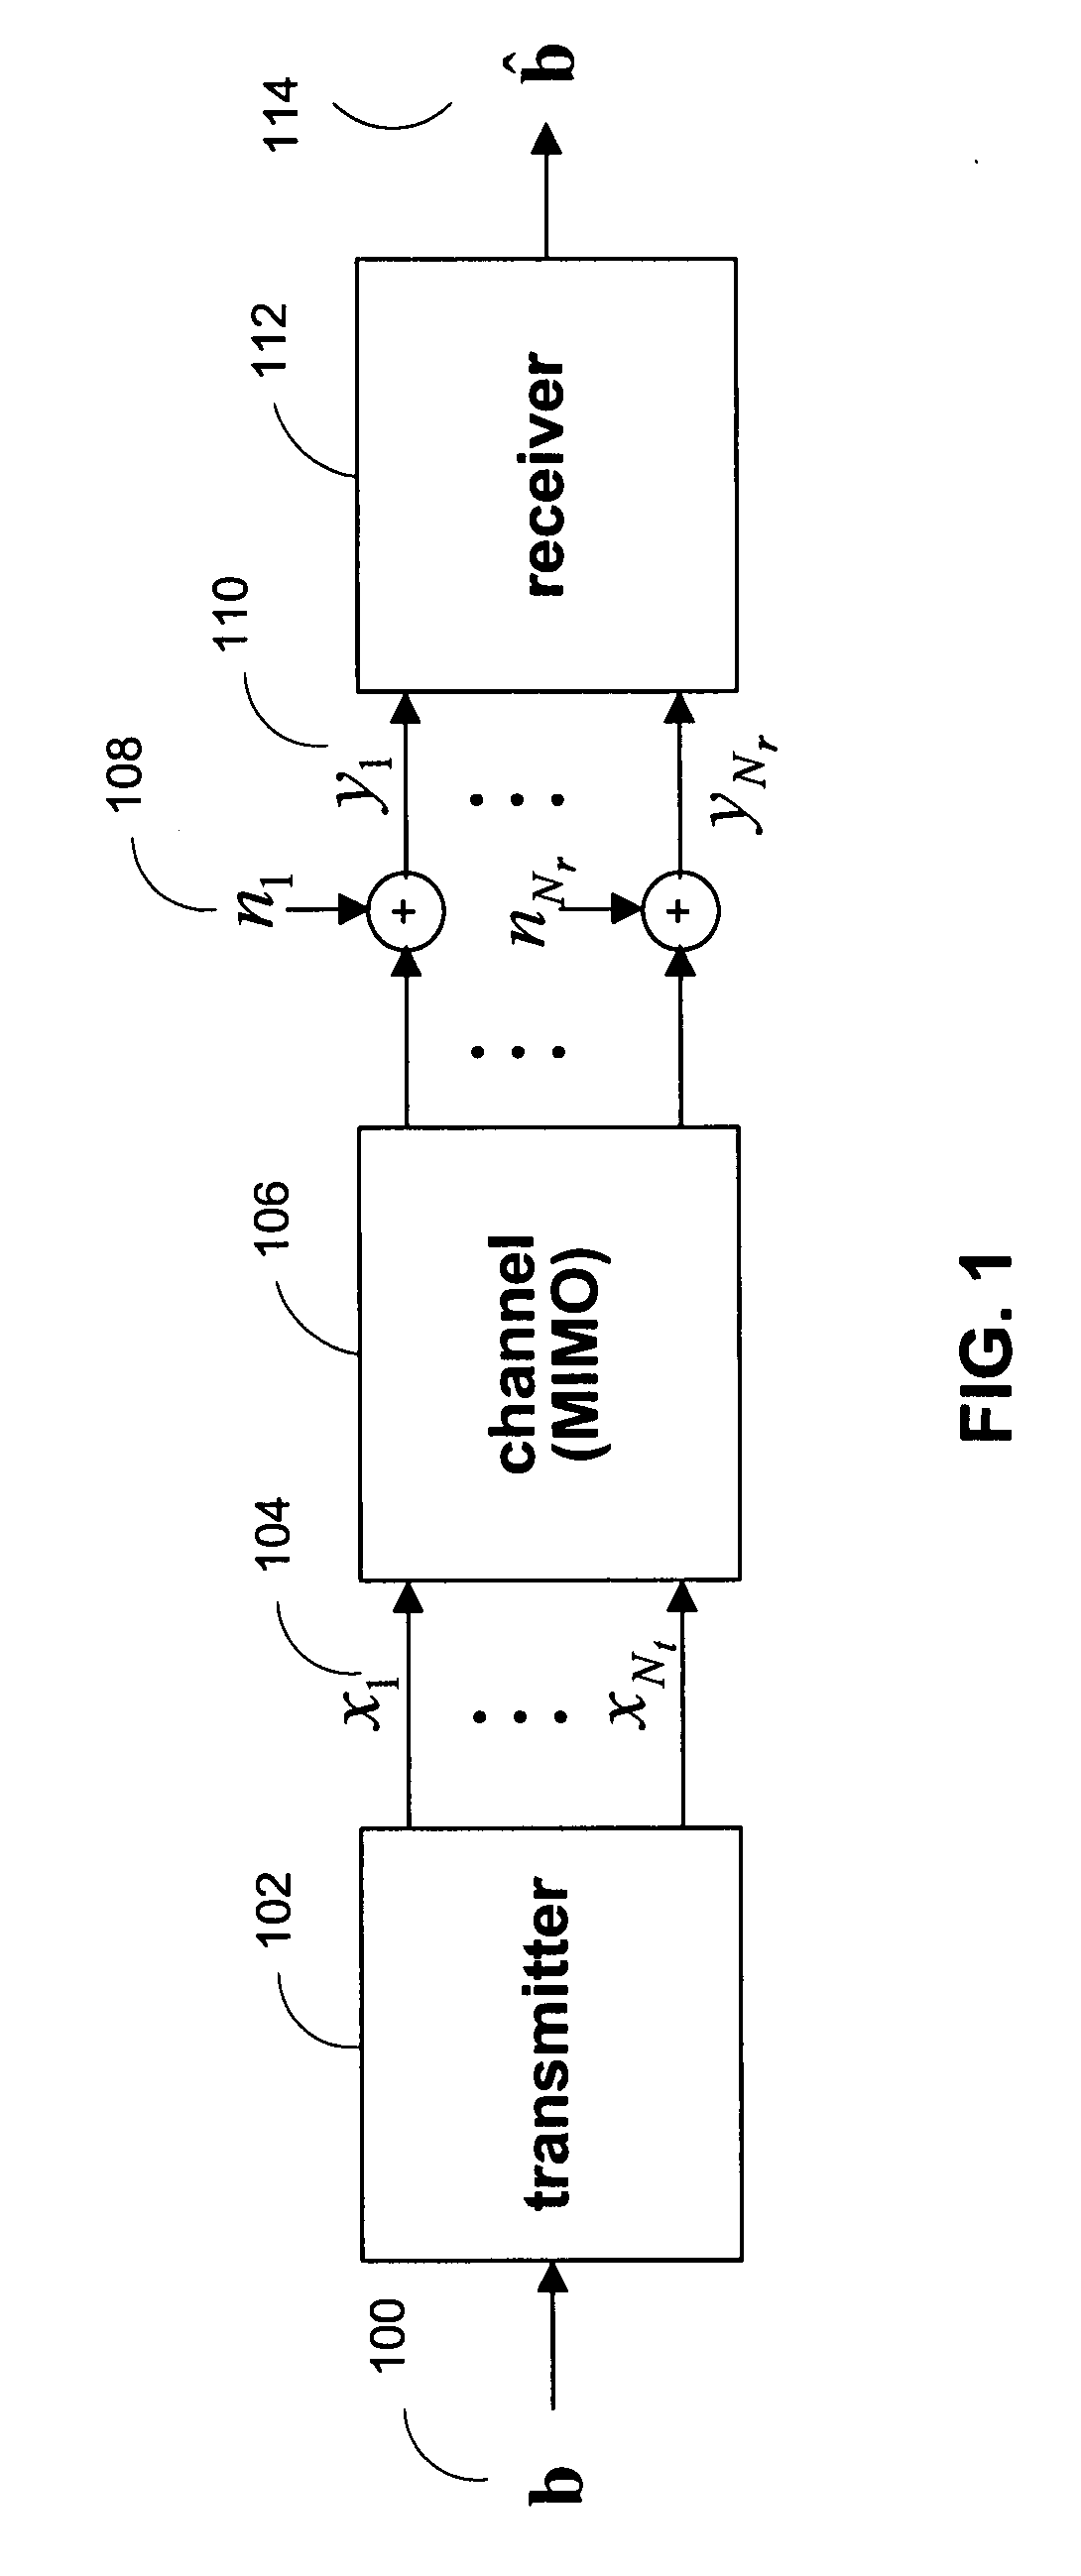 Concatenation-assisted symbol-level combining for MIMO systems with HARQ and/or repetition coding